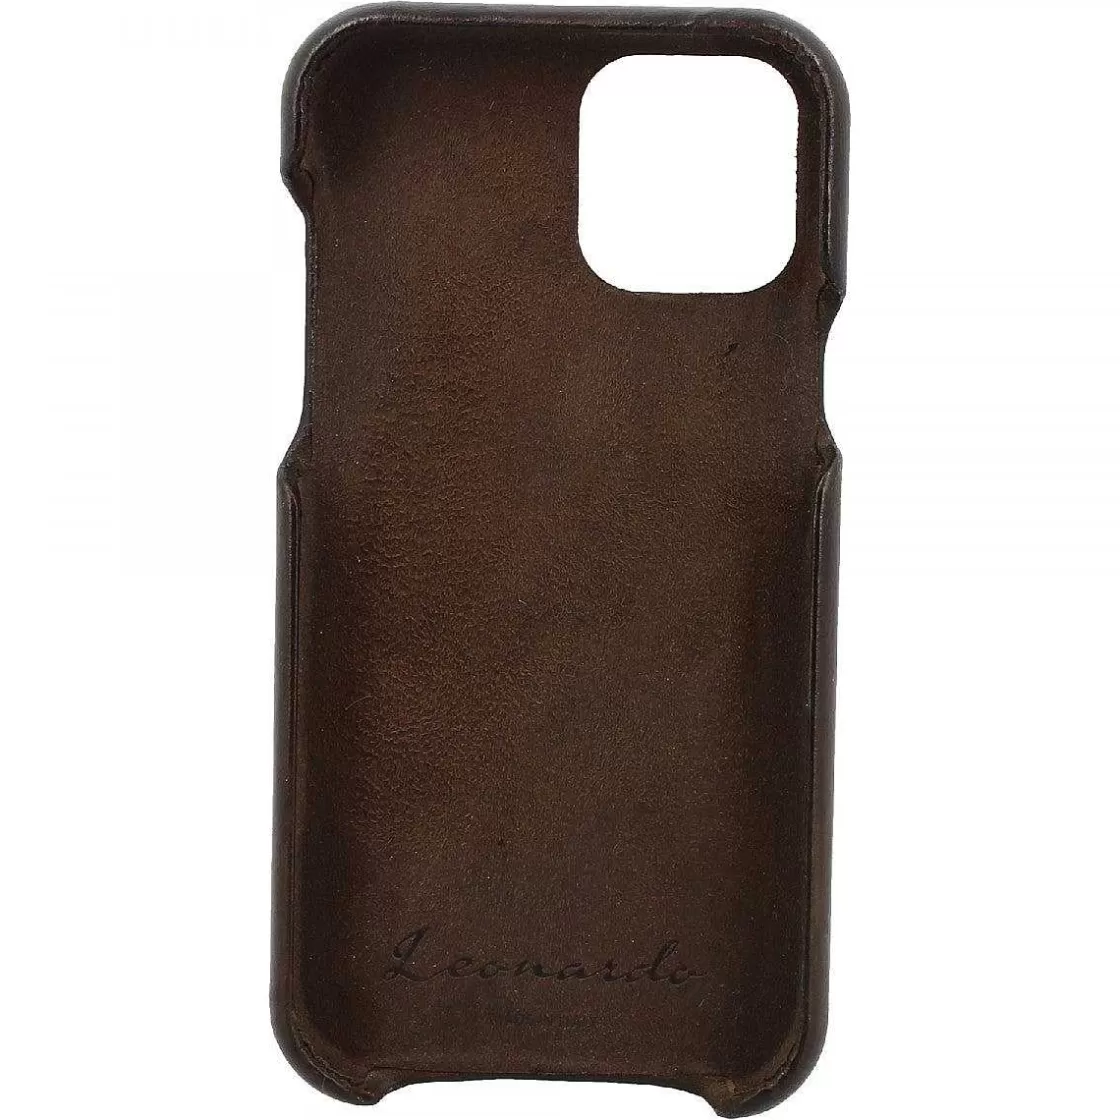 Leonardo Iphone Cover In Hand-Buffered Dark Brown Leather Outlet